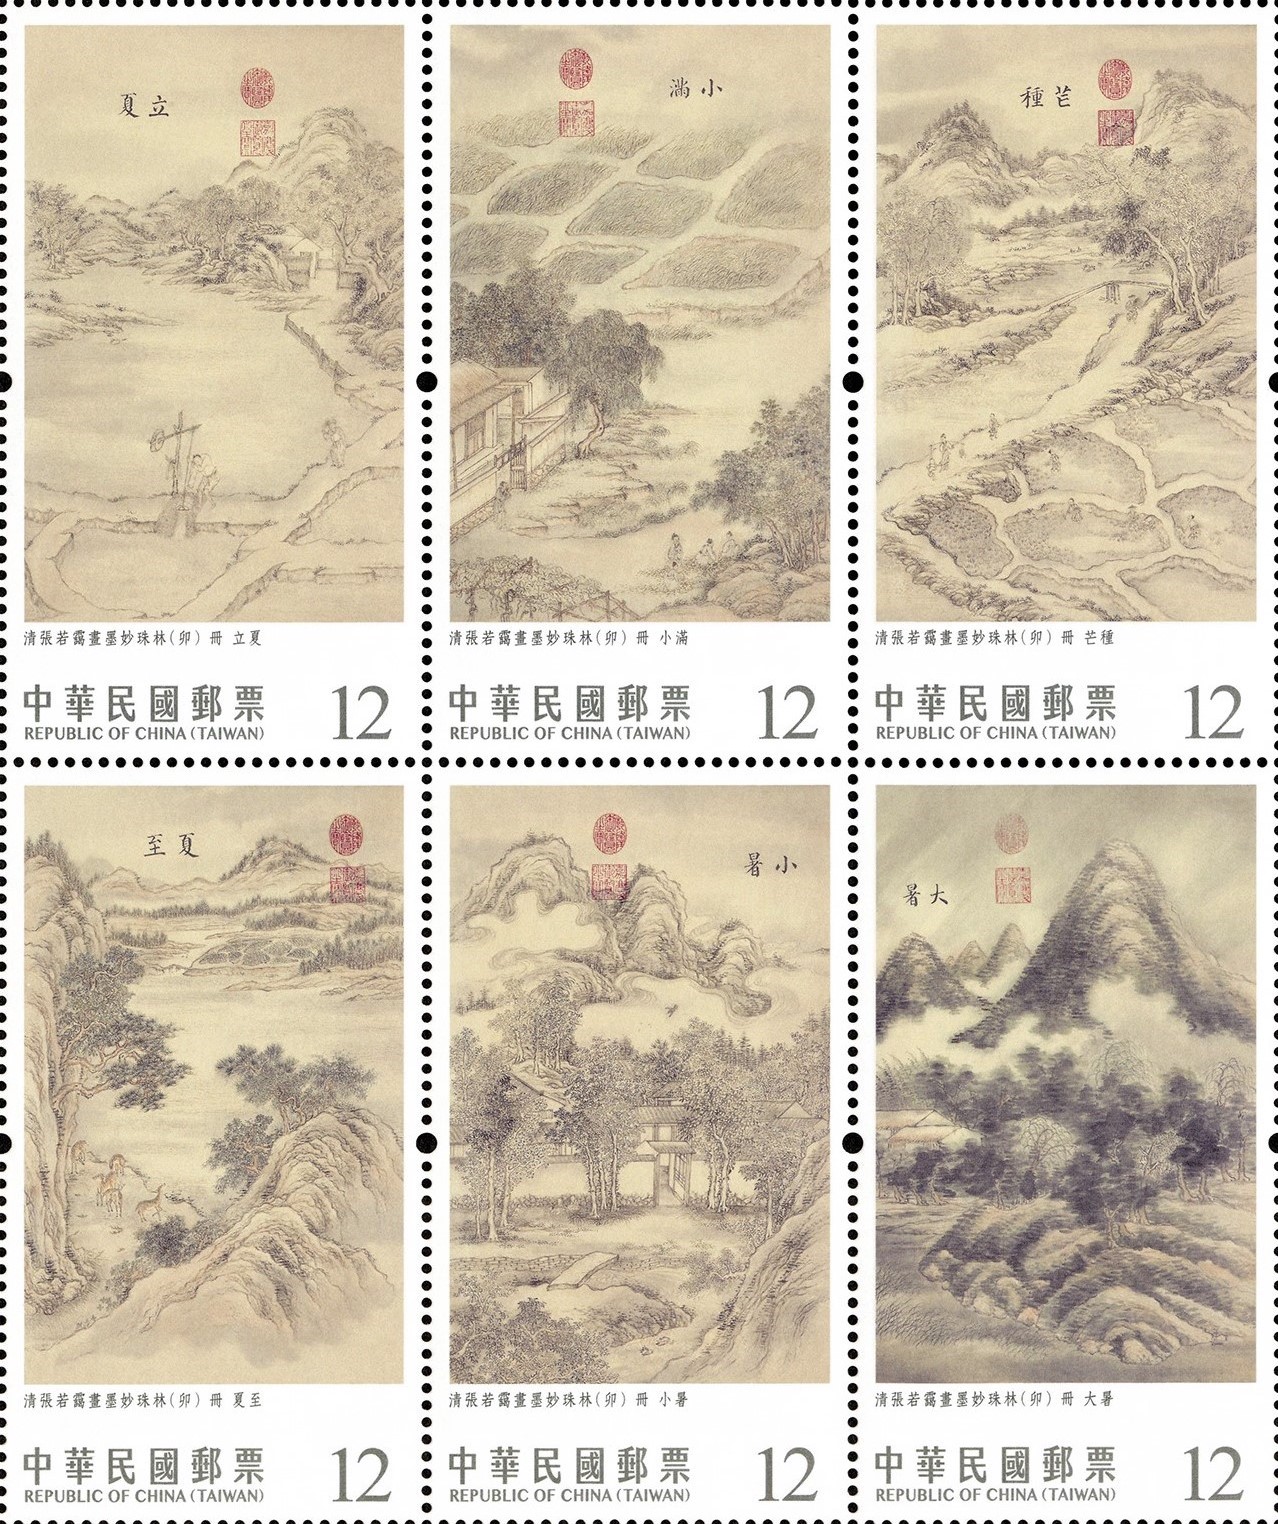 Ancient Chinese Paintings from the NPM Postage Stamps — 24 Solar Terms (Summer)